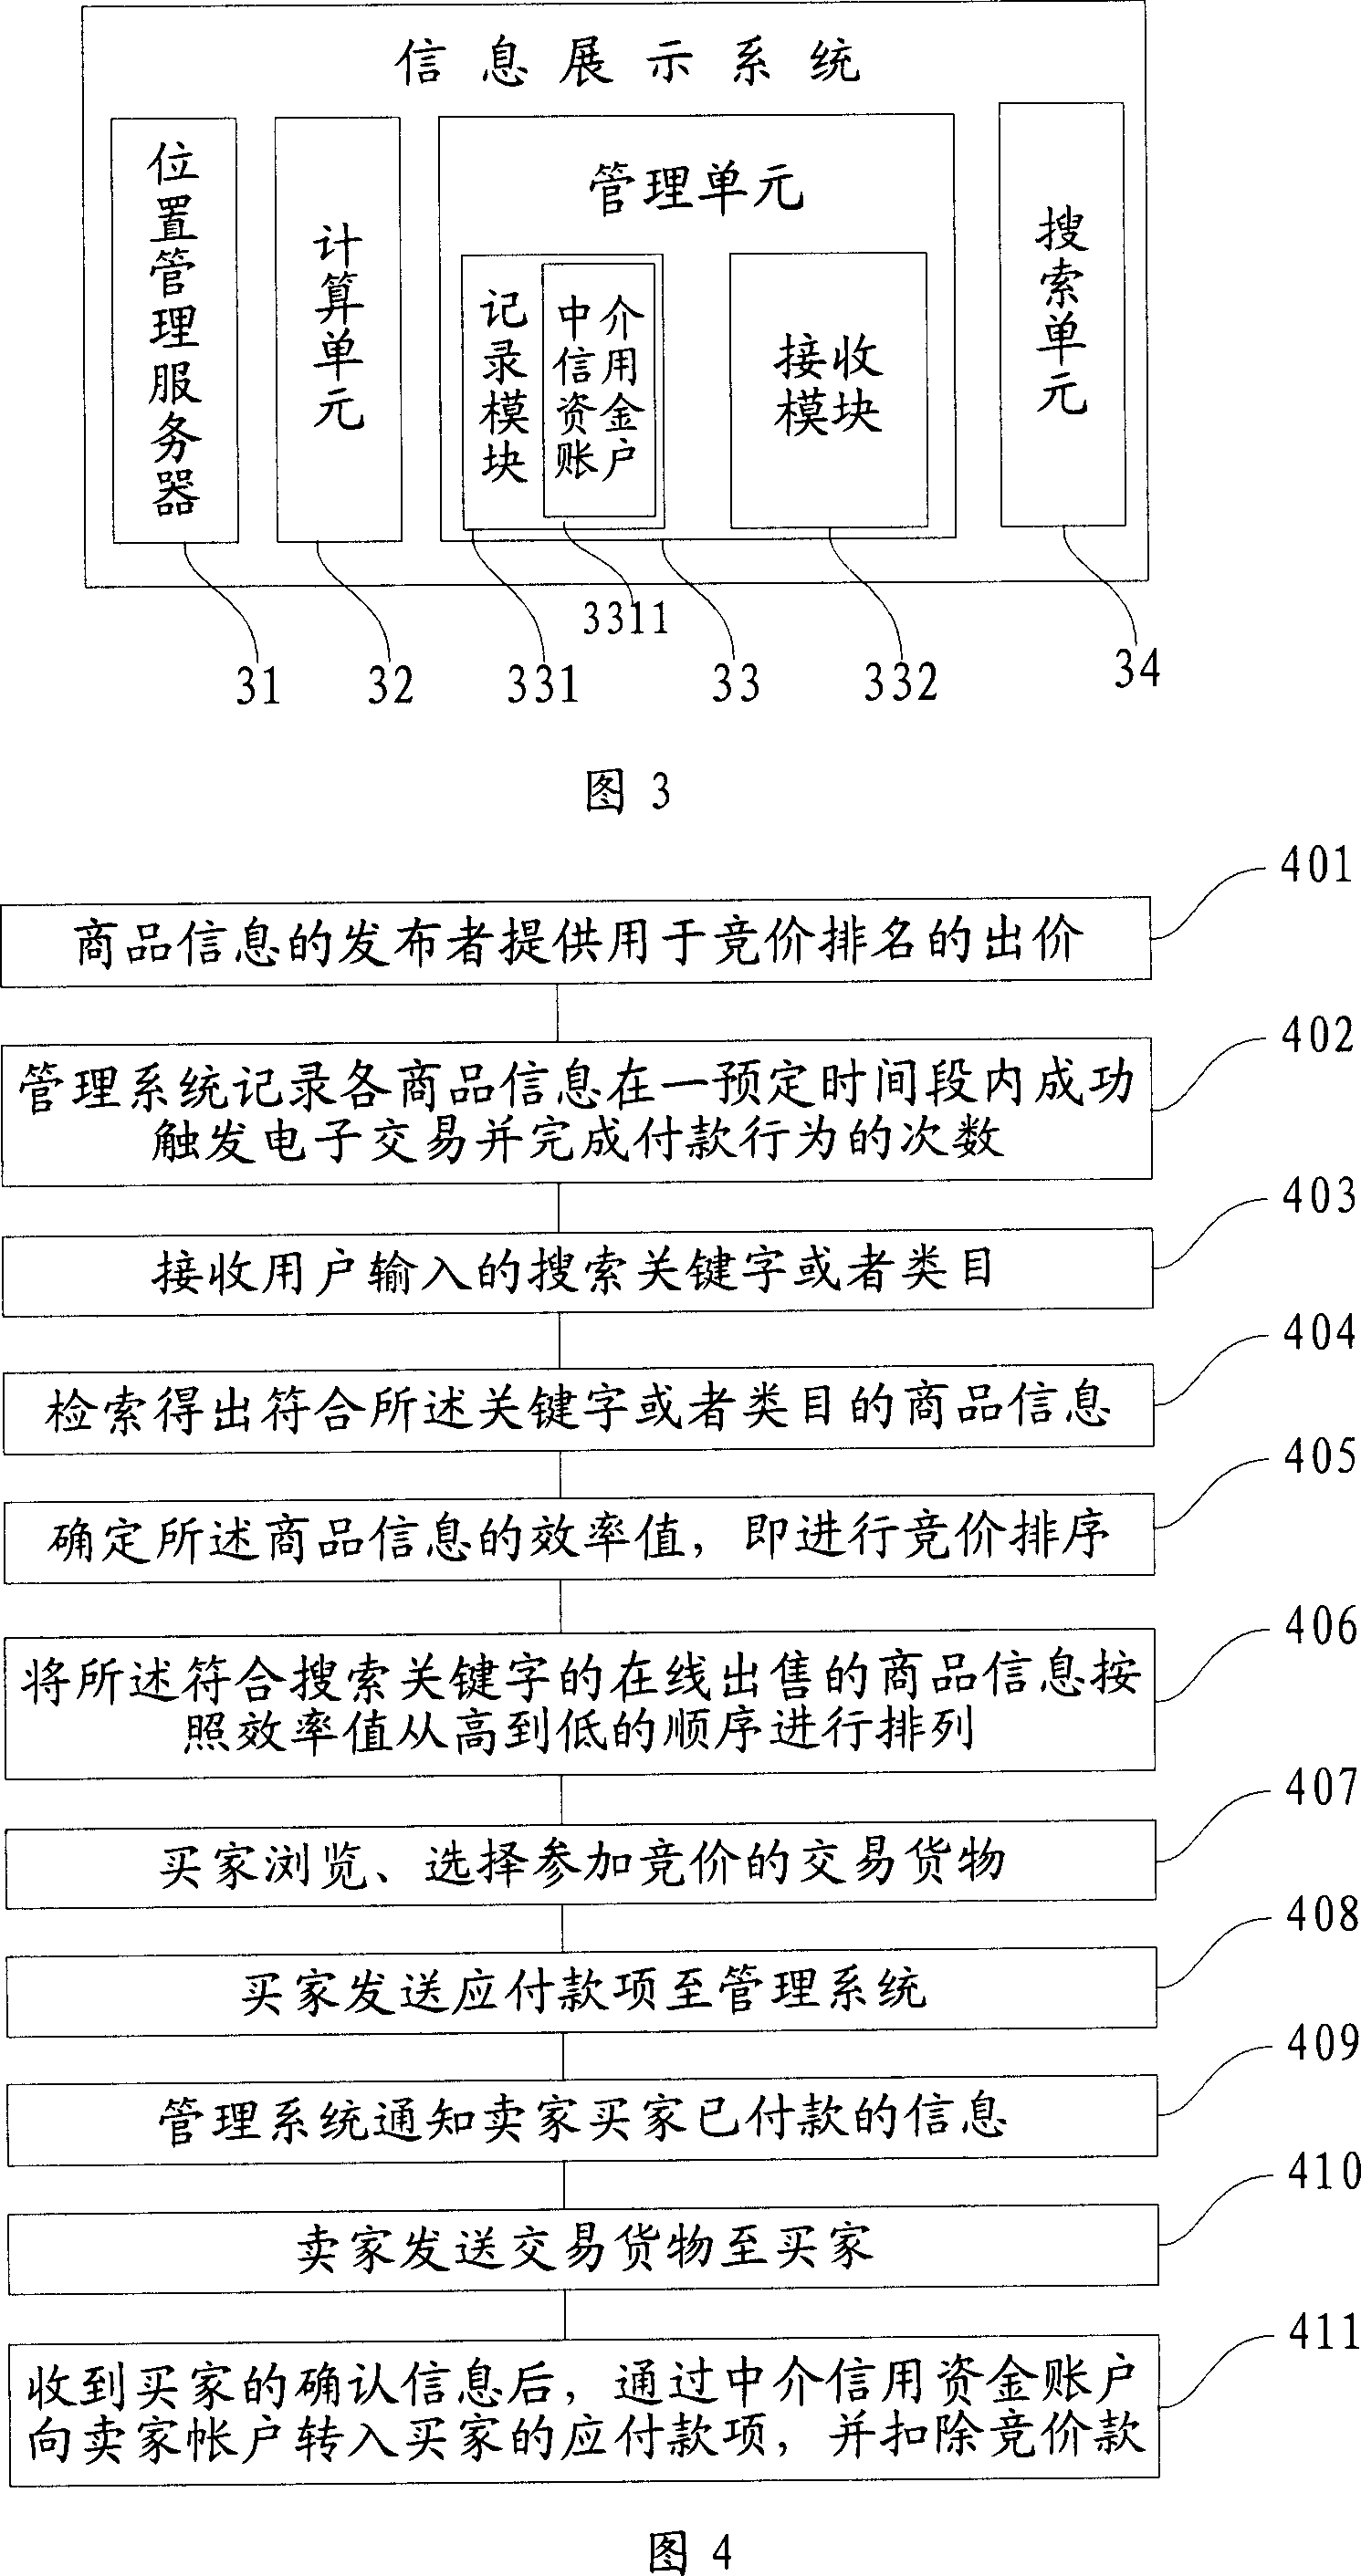 Resource competition alternating method and information showing method and system